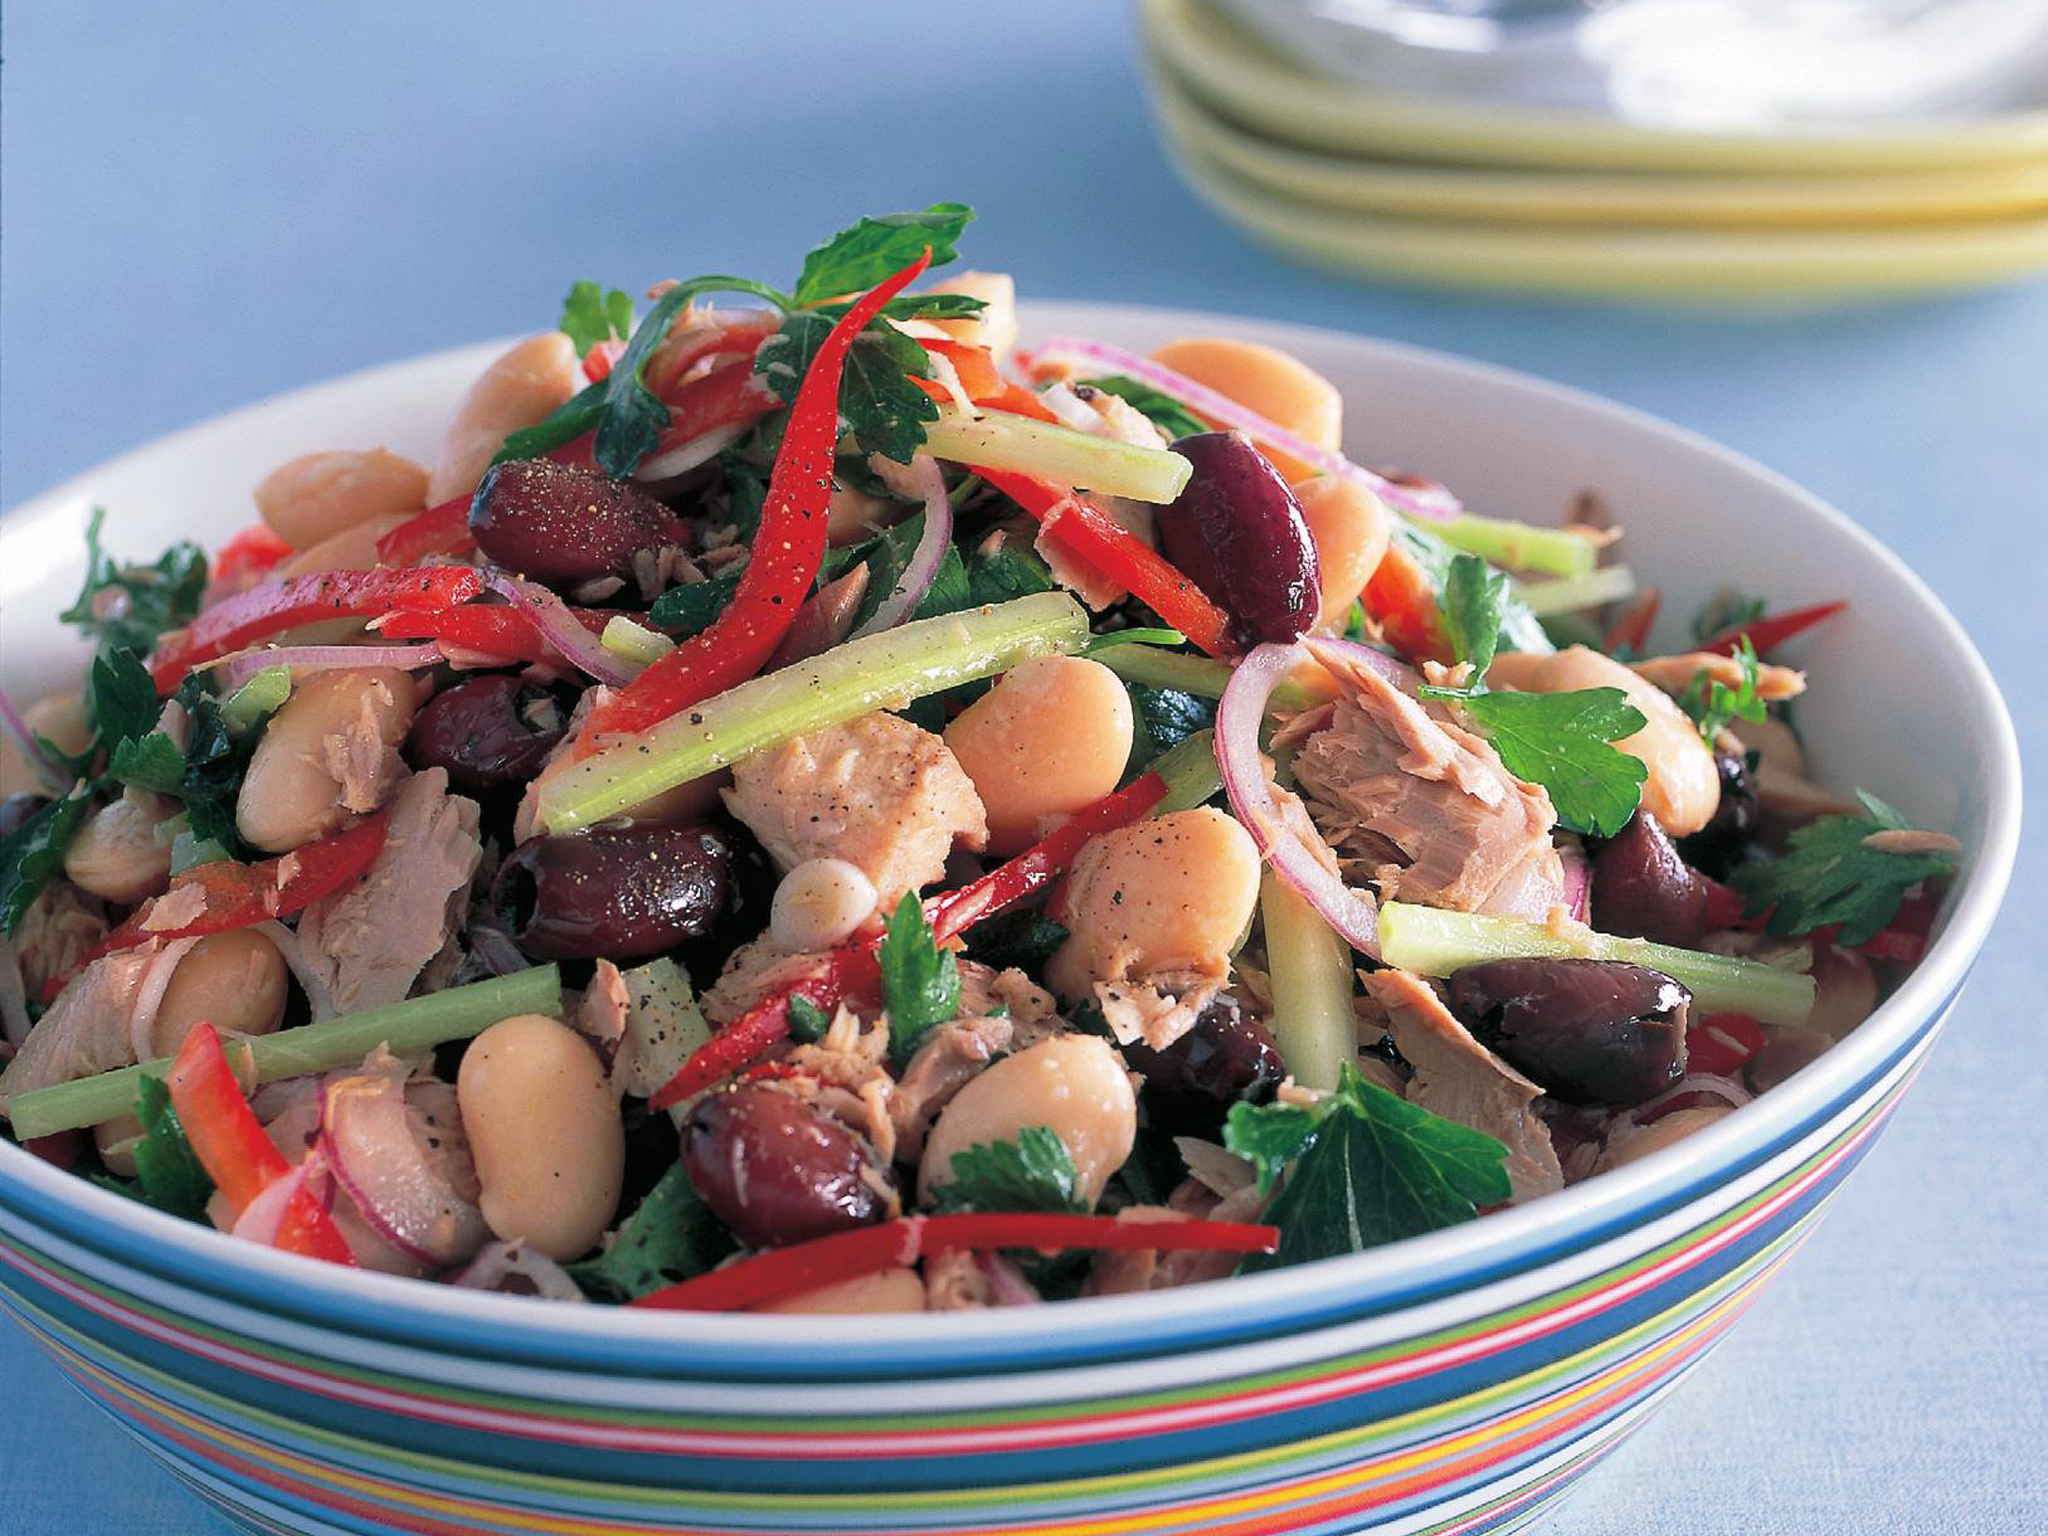 Tuna and white bean salad with french dressing